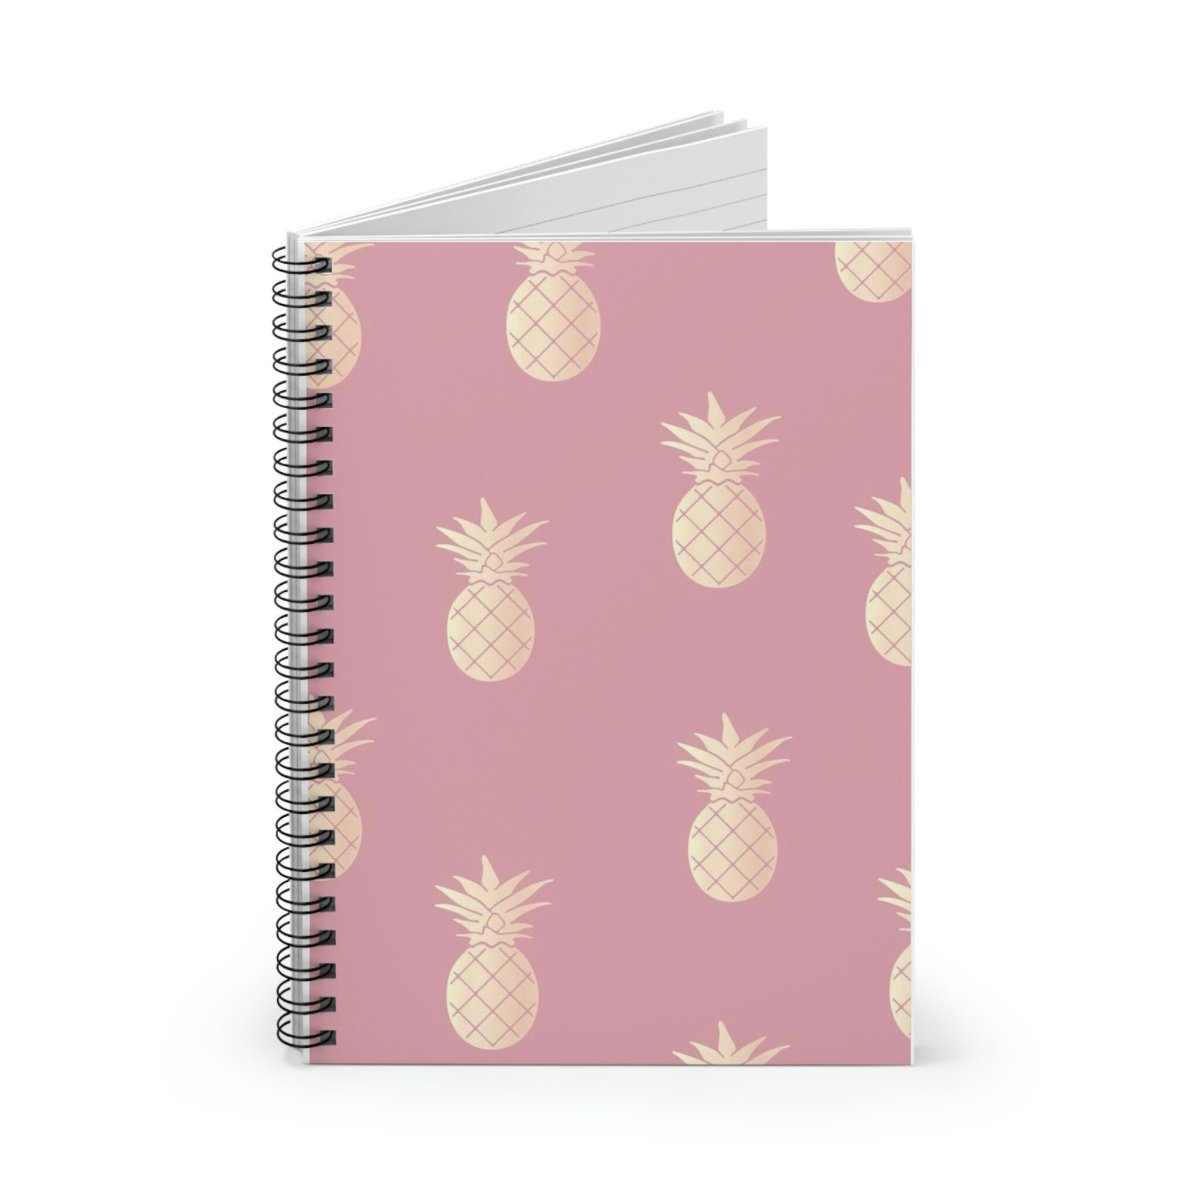 Excited to share this item from my #etsy shop: Gold pineapple Spiral Notebook - Ruled Line #graduation #organize #girlyplanner #girlyjournal #cuteplanner #cutejournal etsy.me/3Z1HGIL